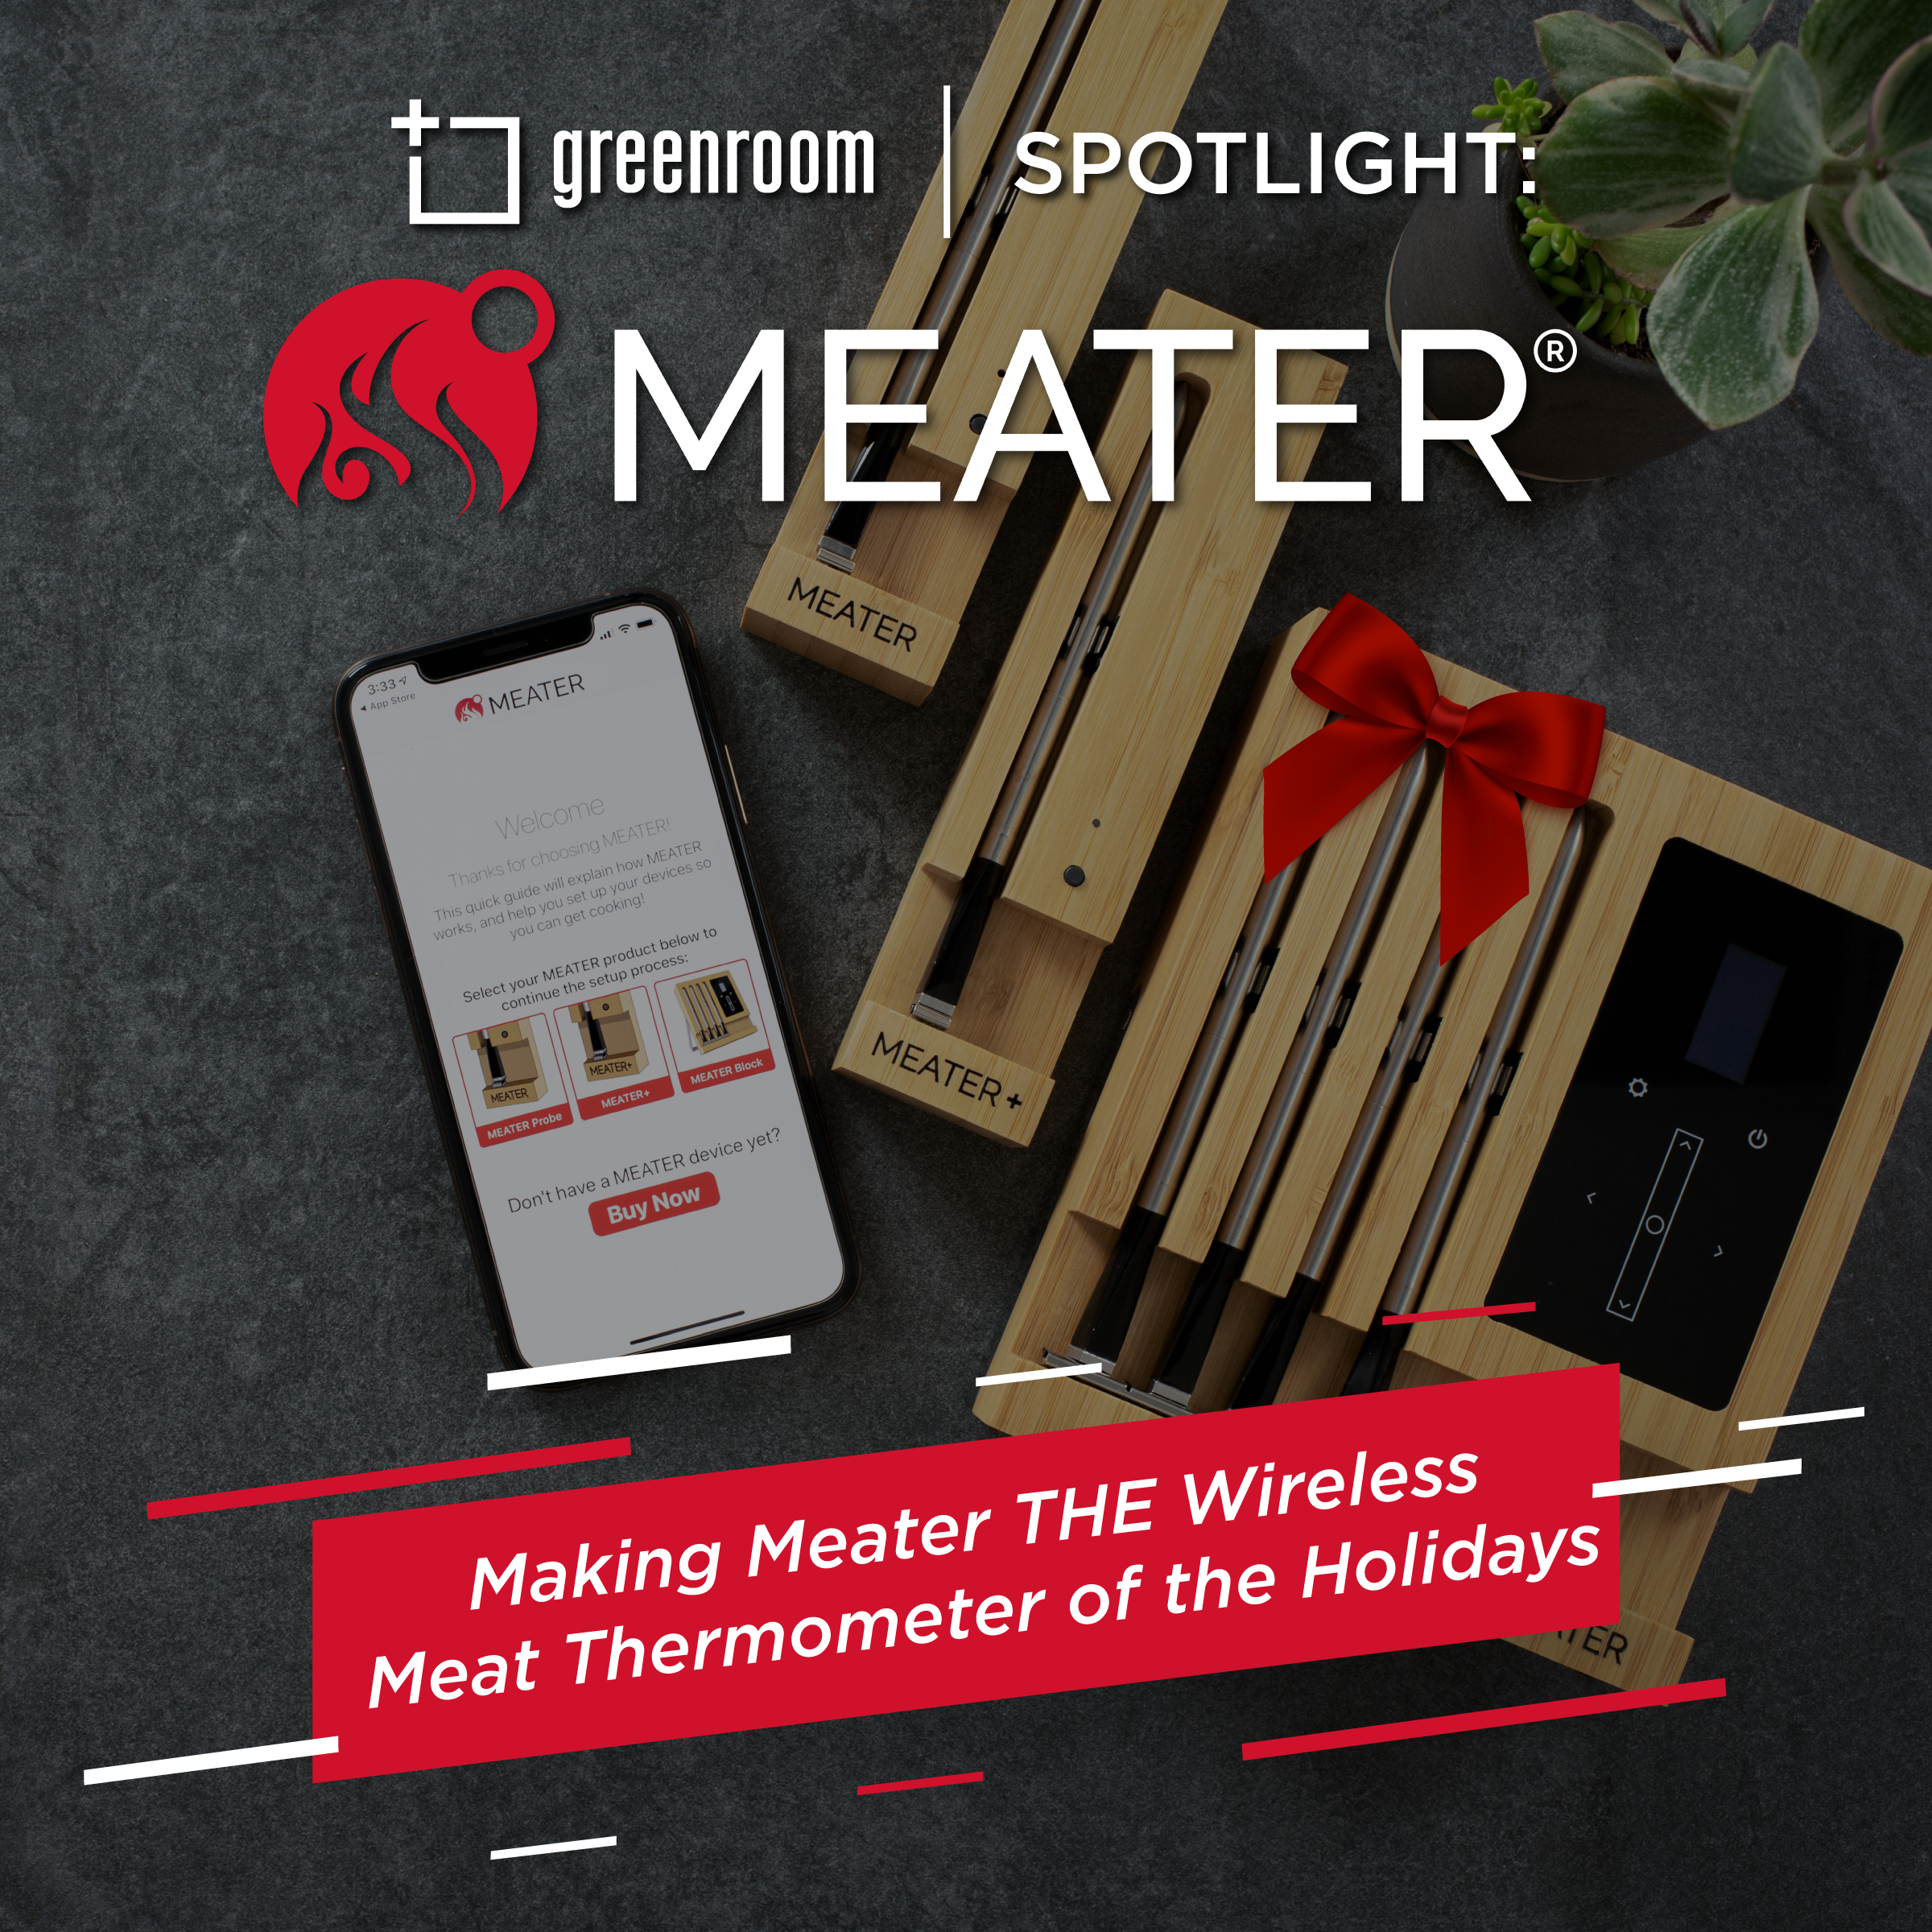 How GreenRoom Made Meater THE Wireless Meat Thermometer of the Holidays -  Greenroom Agency